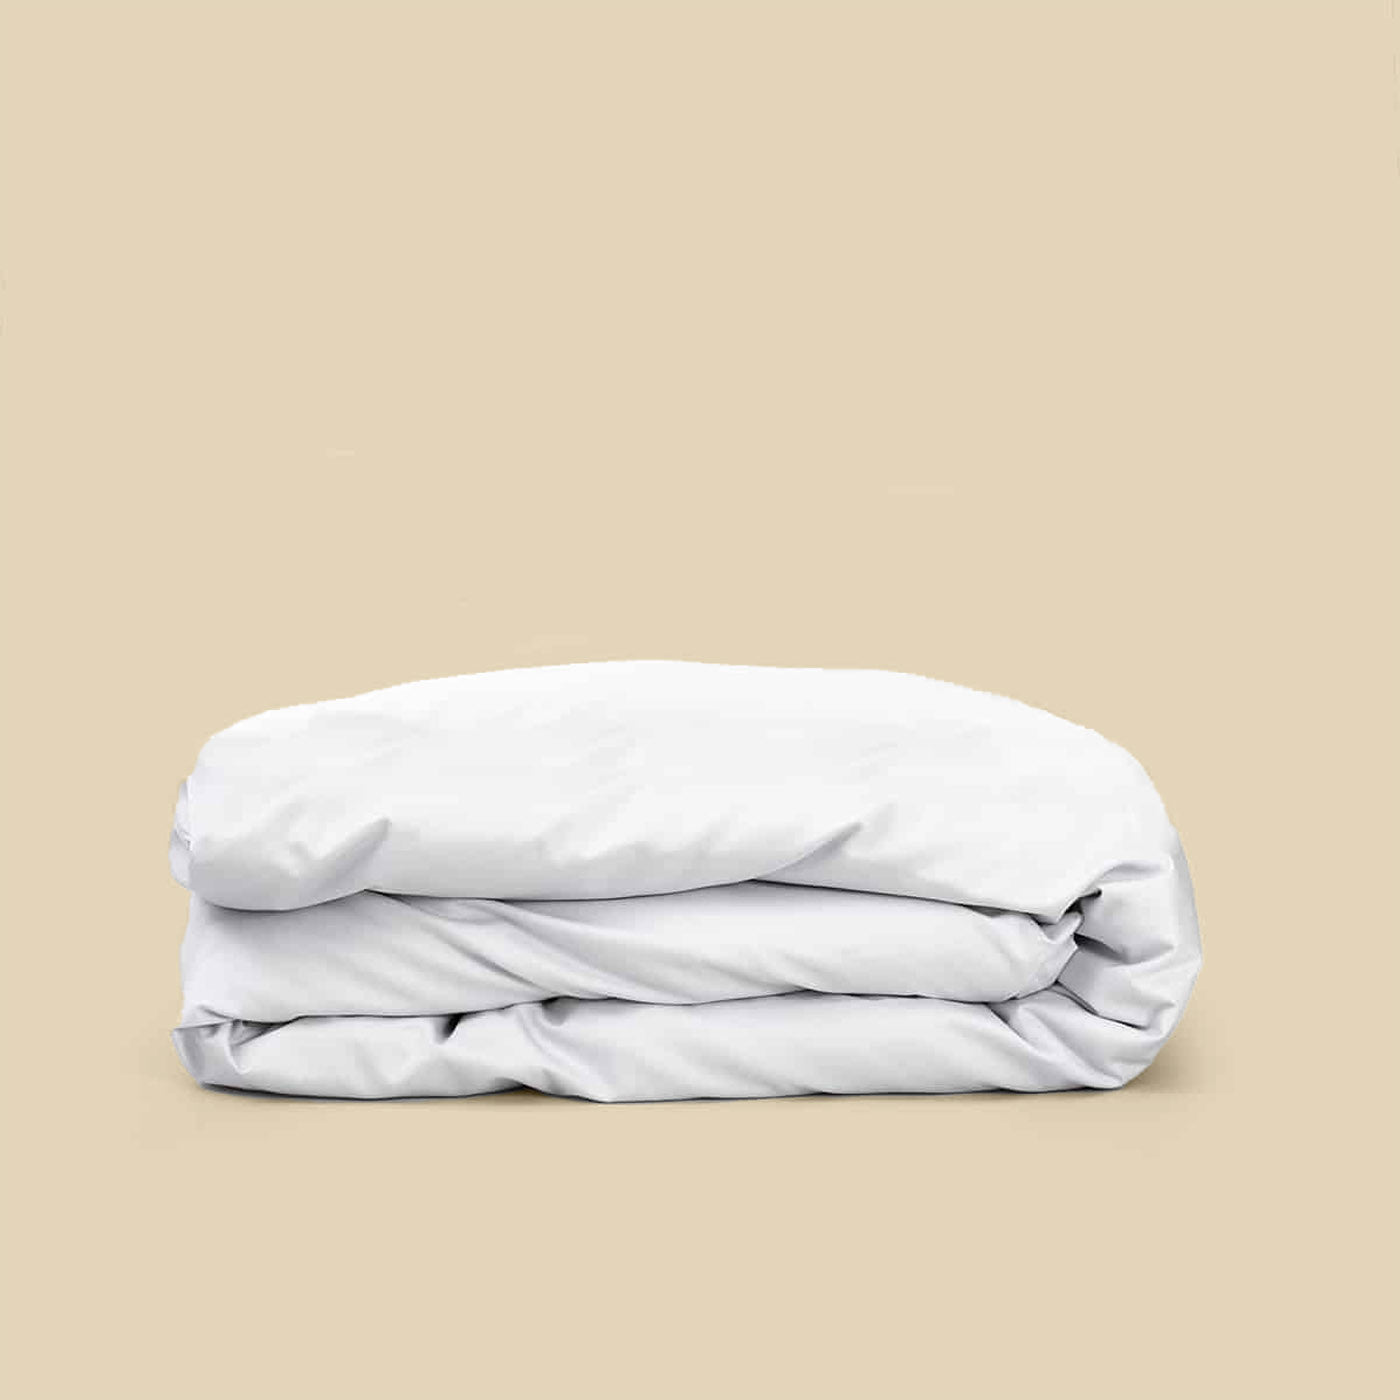 The Large Duvet Cover | Supima Sateen - Stone Grey